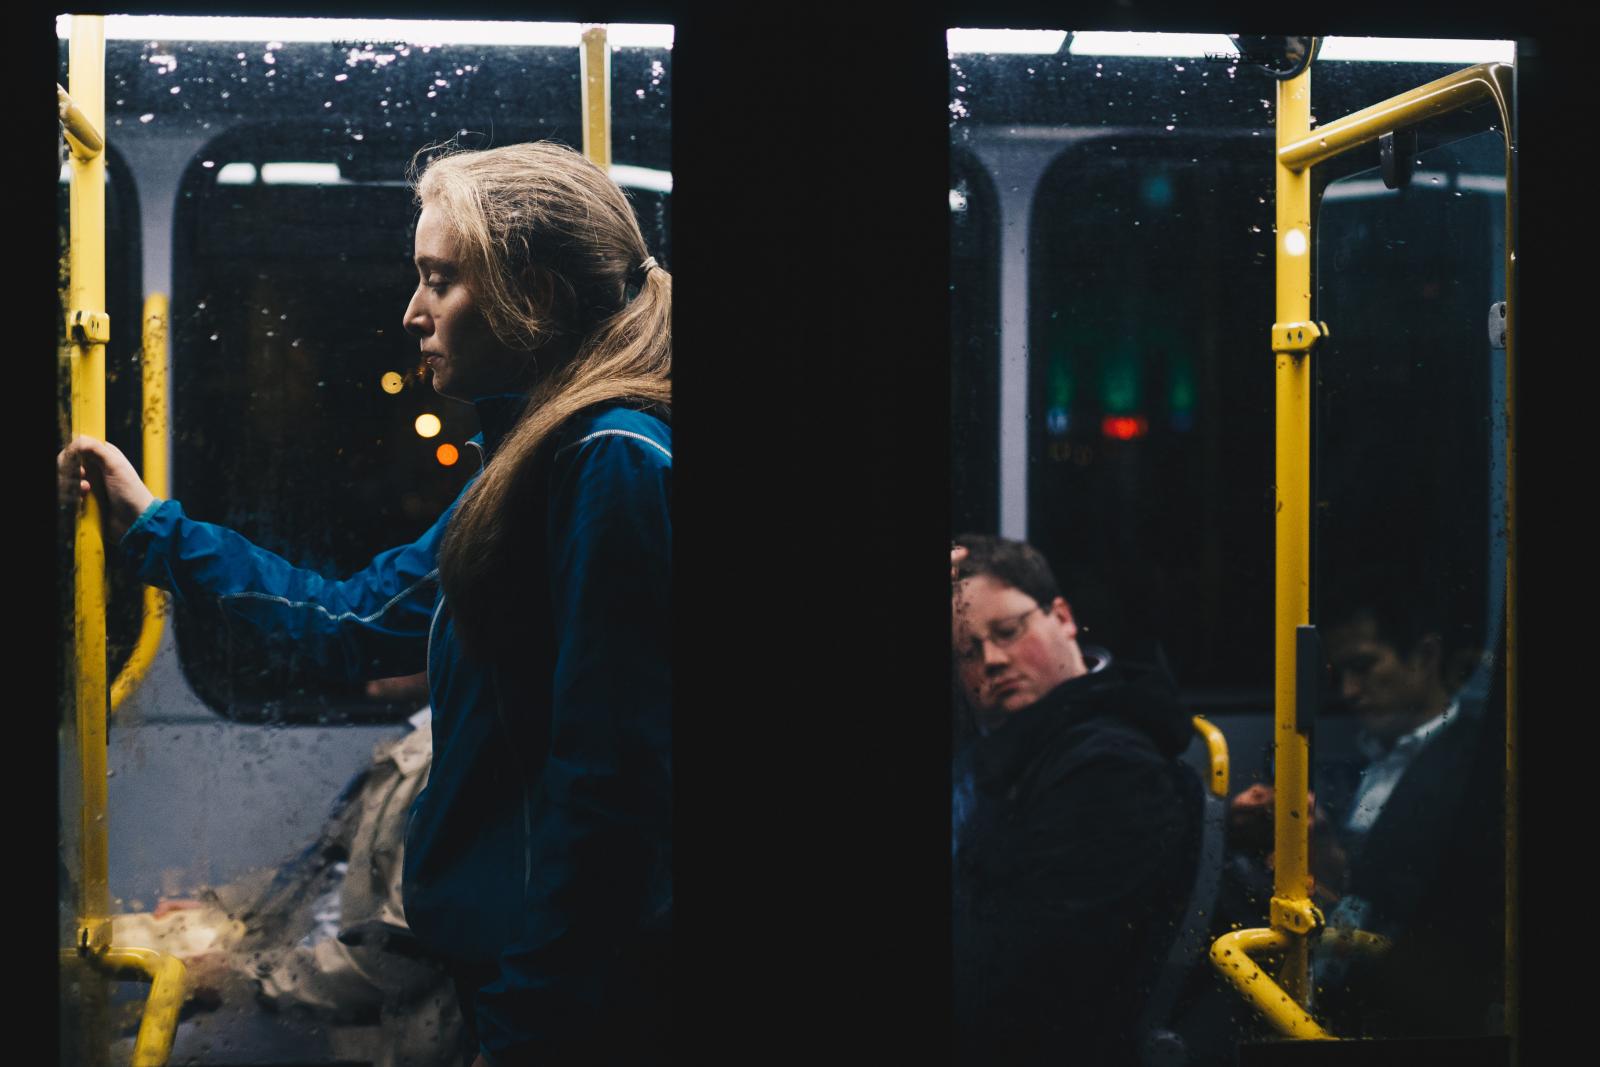 Woman standing on bus